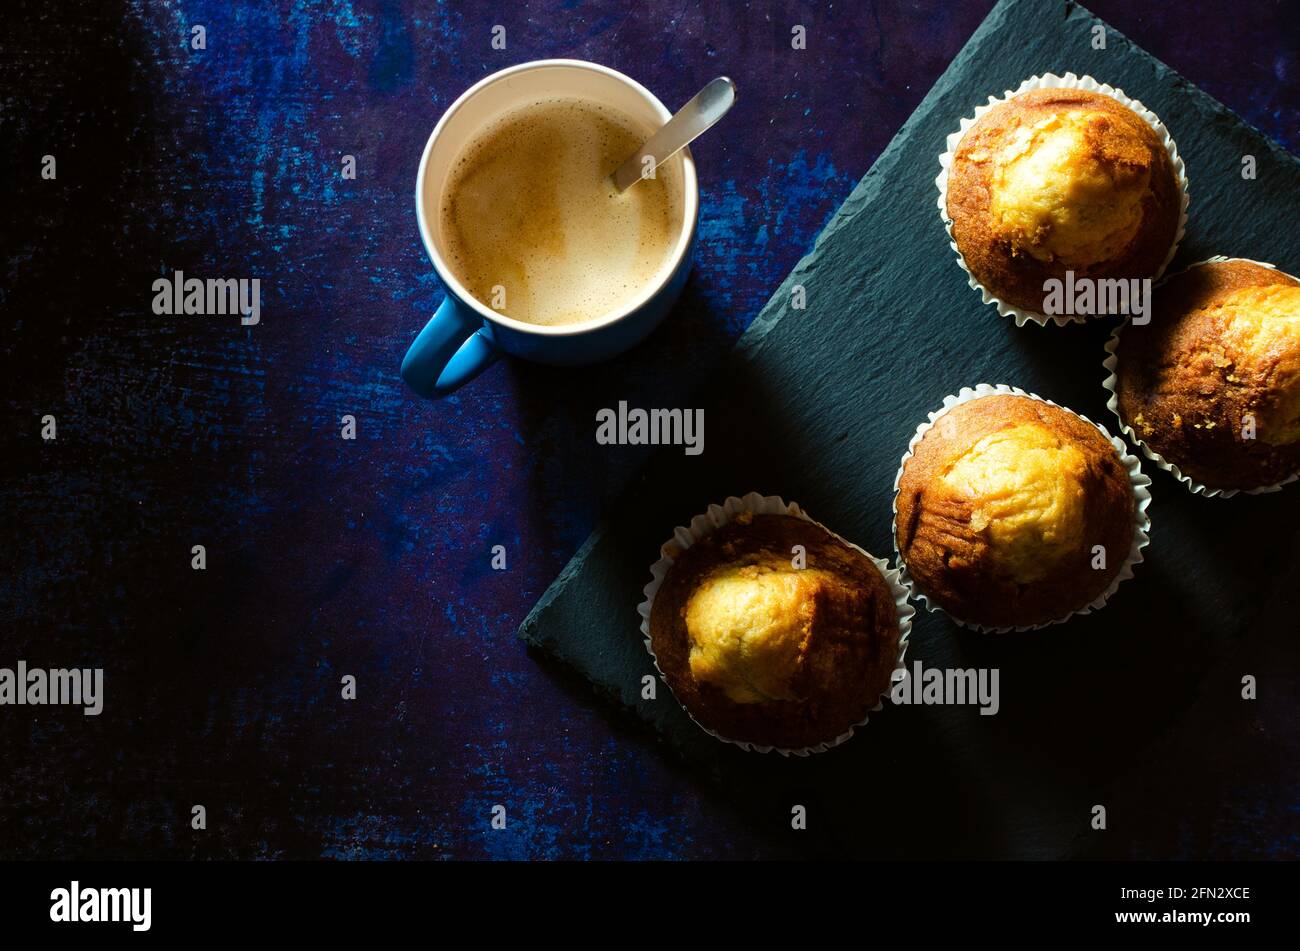 Breakfast of coffee with muffins on a slate plate on a rusty blue background. Dark food Stock Photo